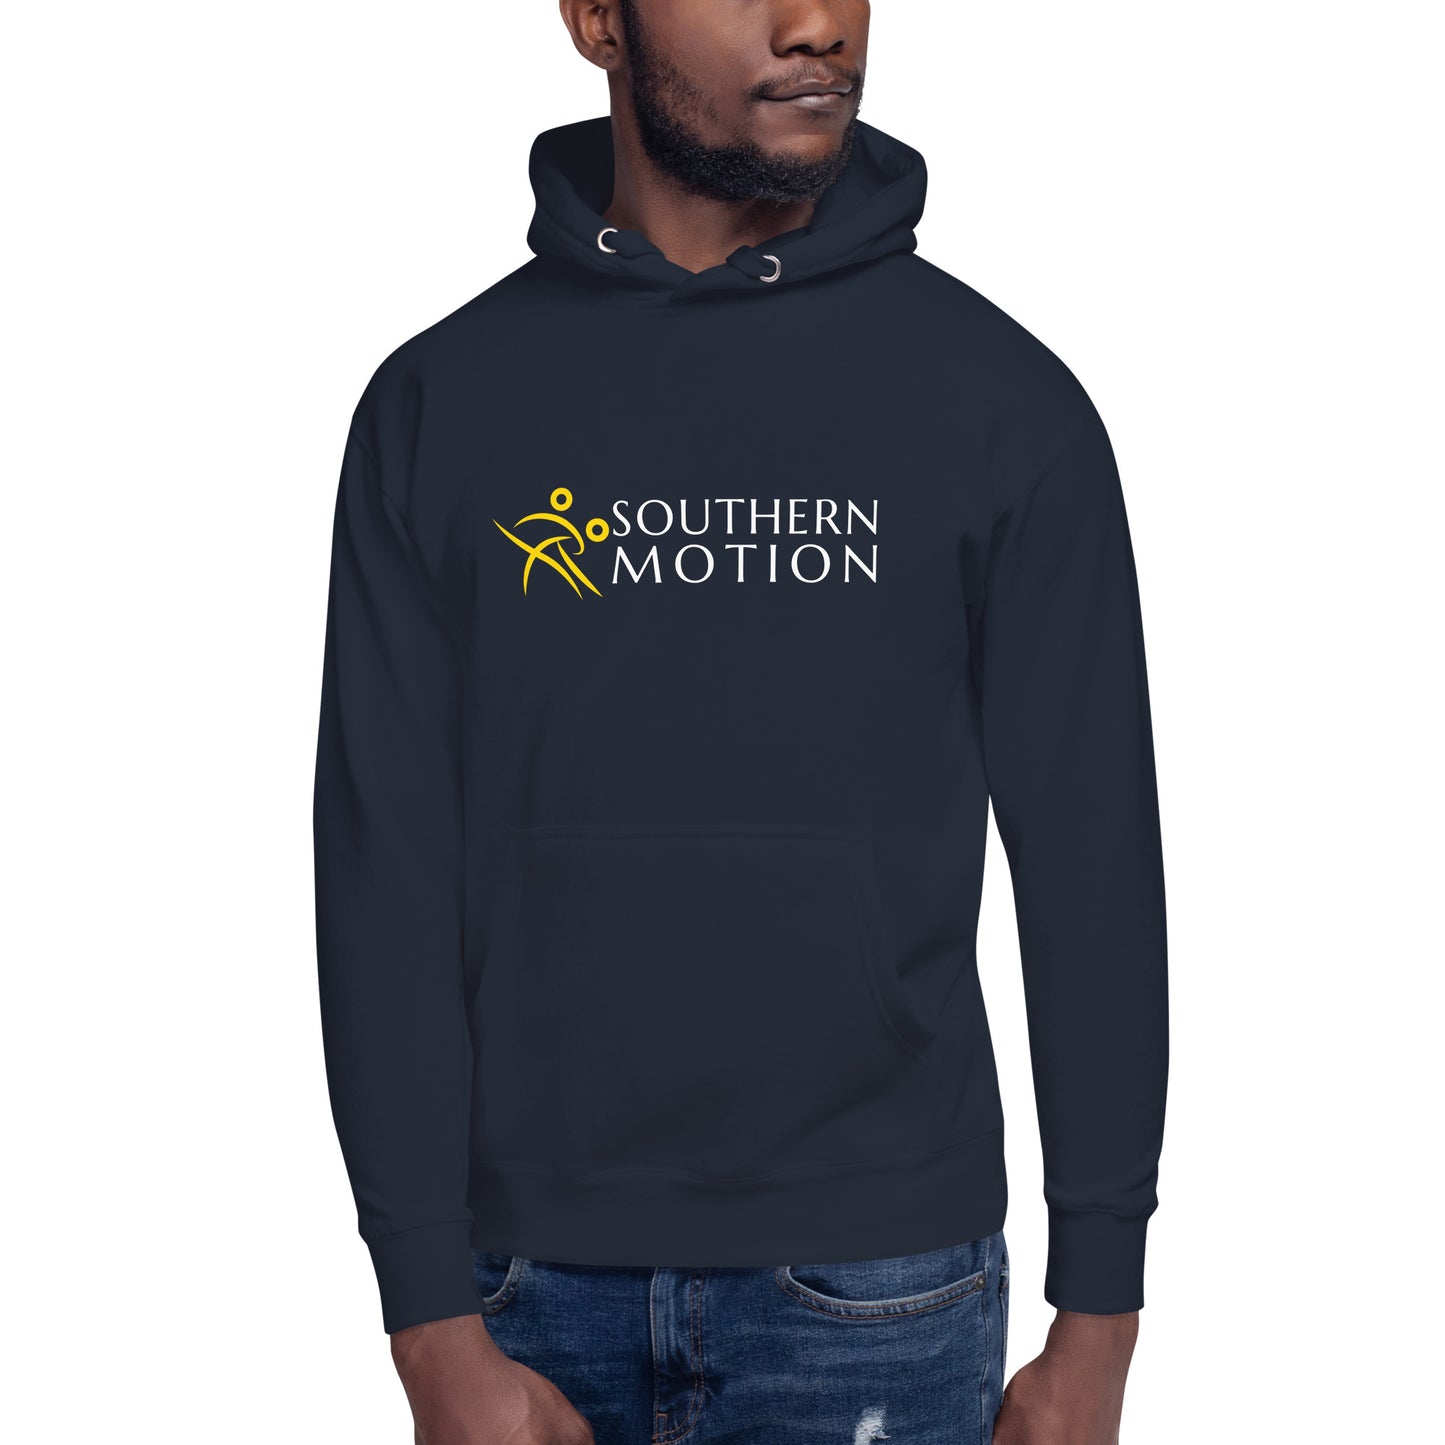 Southern Motion Hoodie